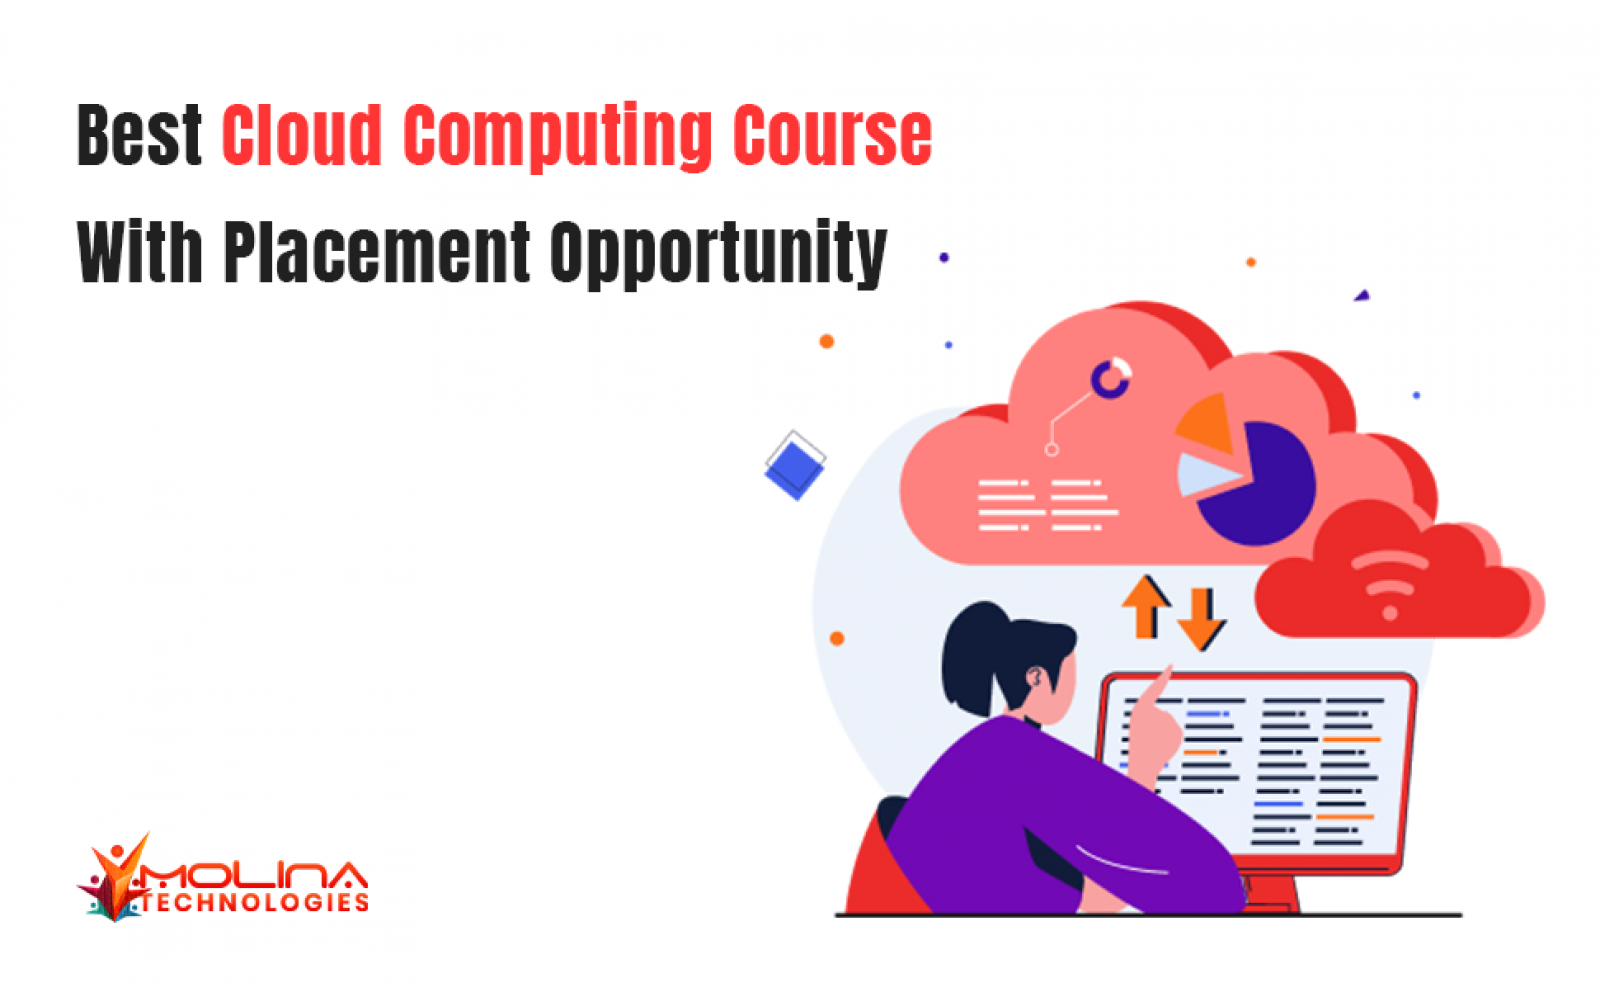 Best Cloud Computing Course With Placement Opportunity